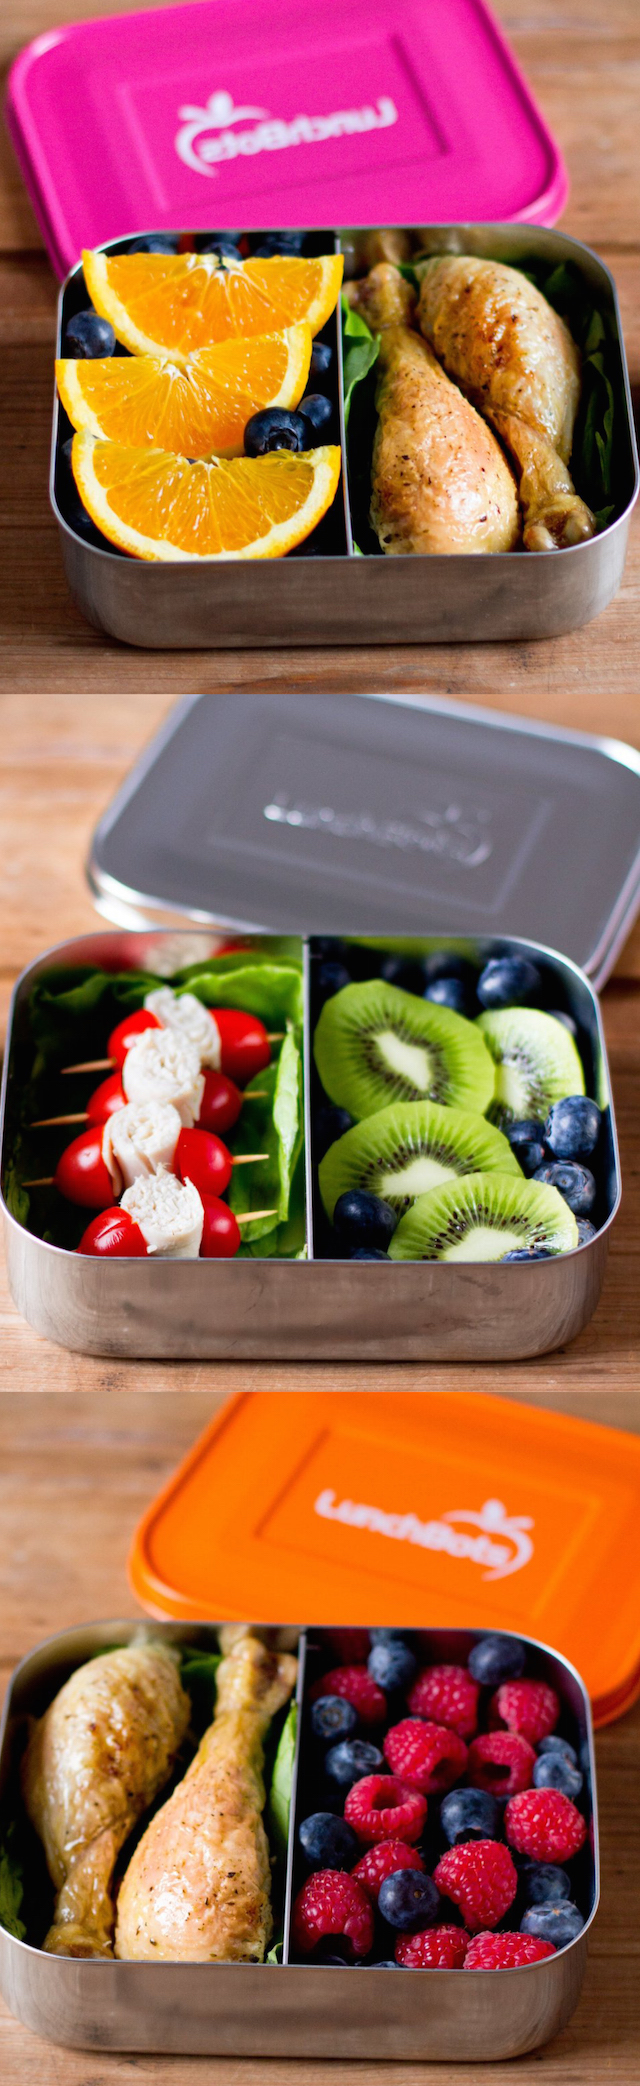 BPA free lunch boxes. Saves money by eliminating the need for baggies!